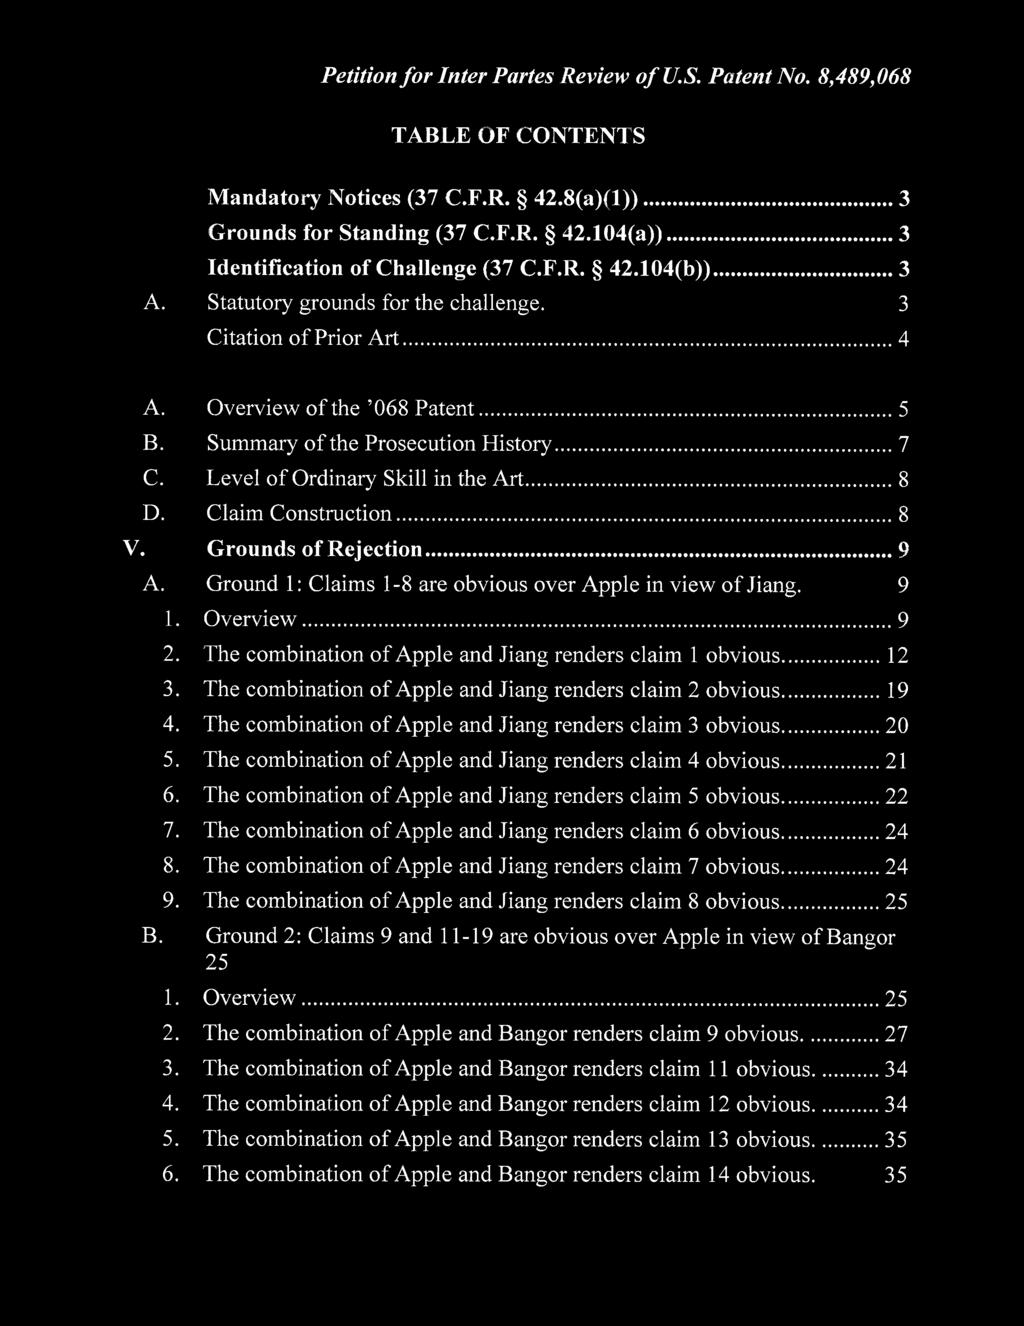 TABLE OF CONTENTS I. Mandatory Notices (37 C.F.R. 42.8(a)(1))...3 II. III. Grounds for Standing (37 C.F.R. 42.104(a))...3 Identification of Challenge (37 C.F.R. 42.104(b))...3 A.